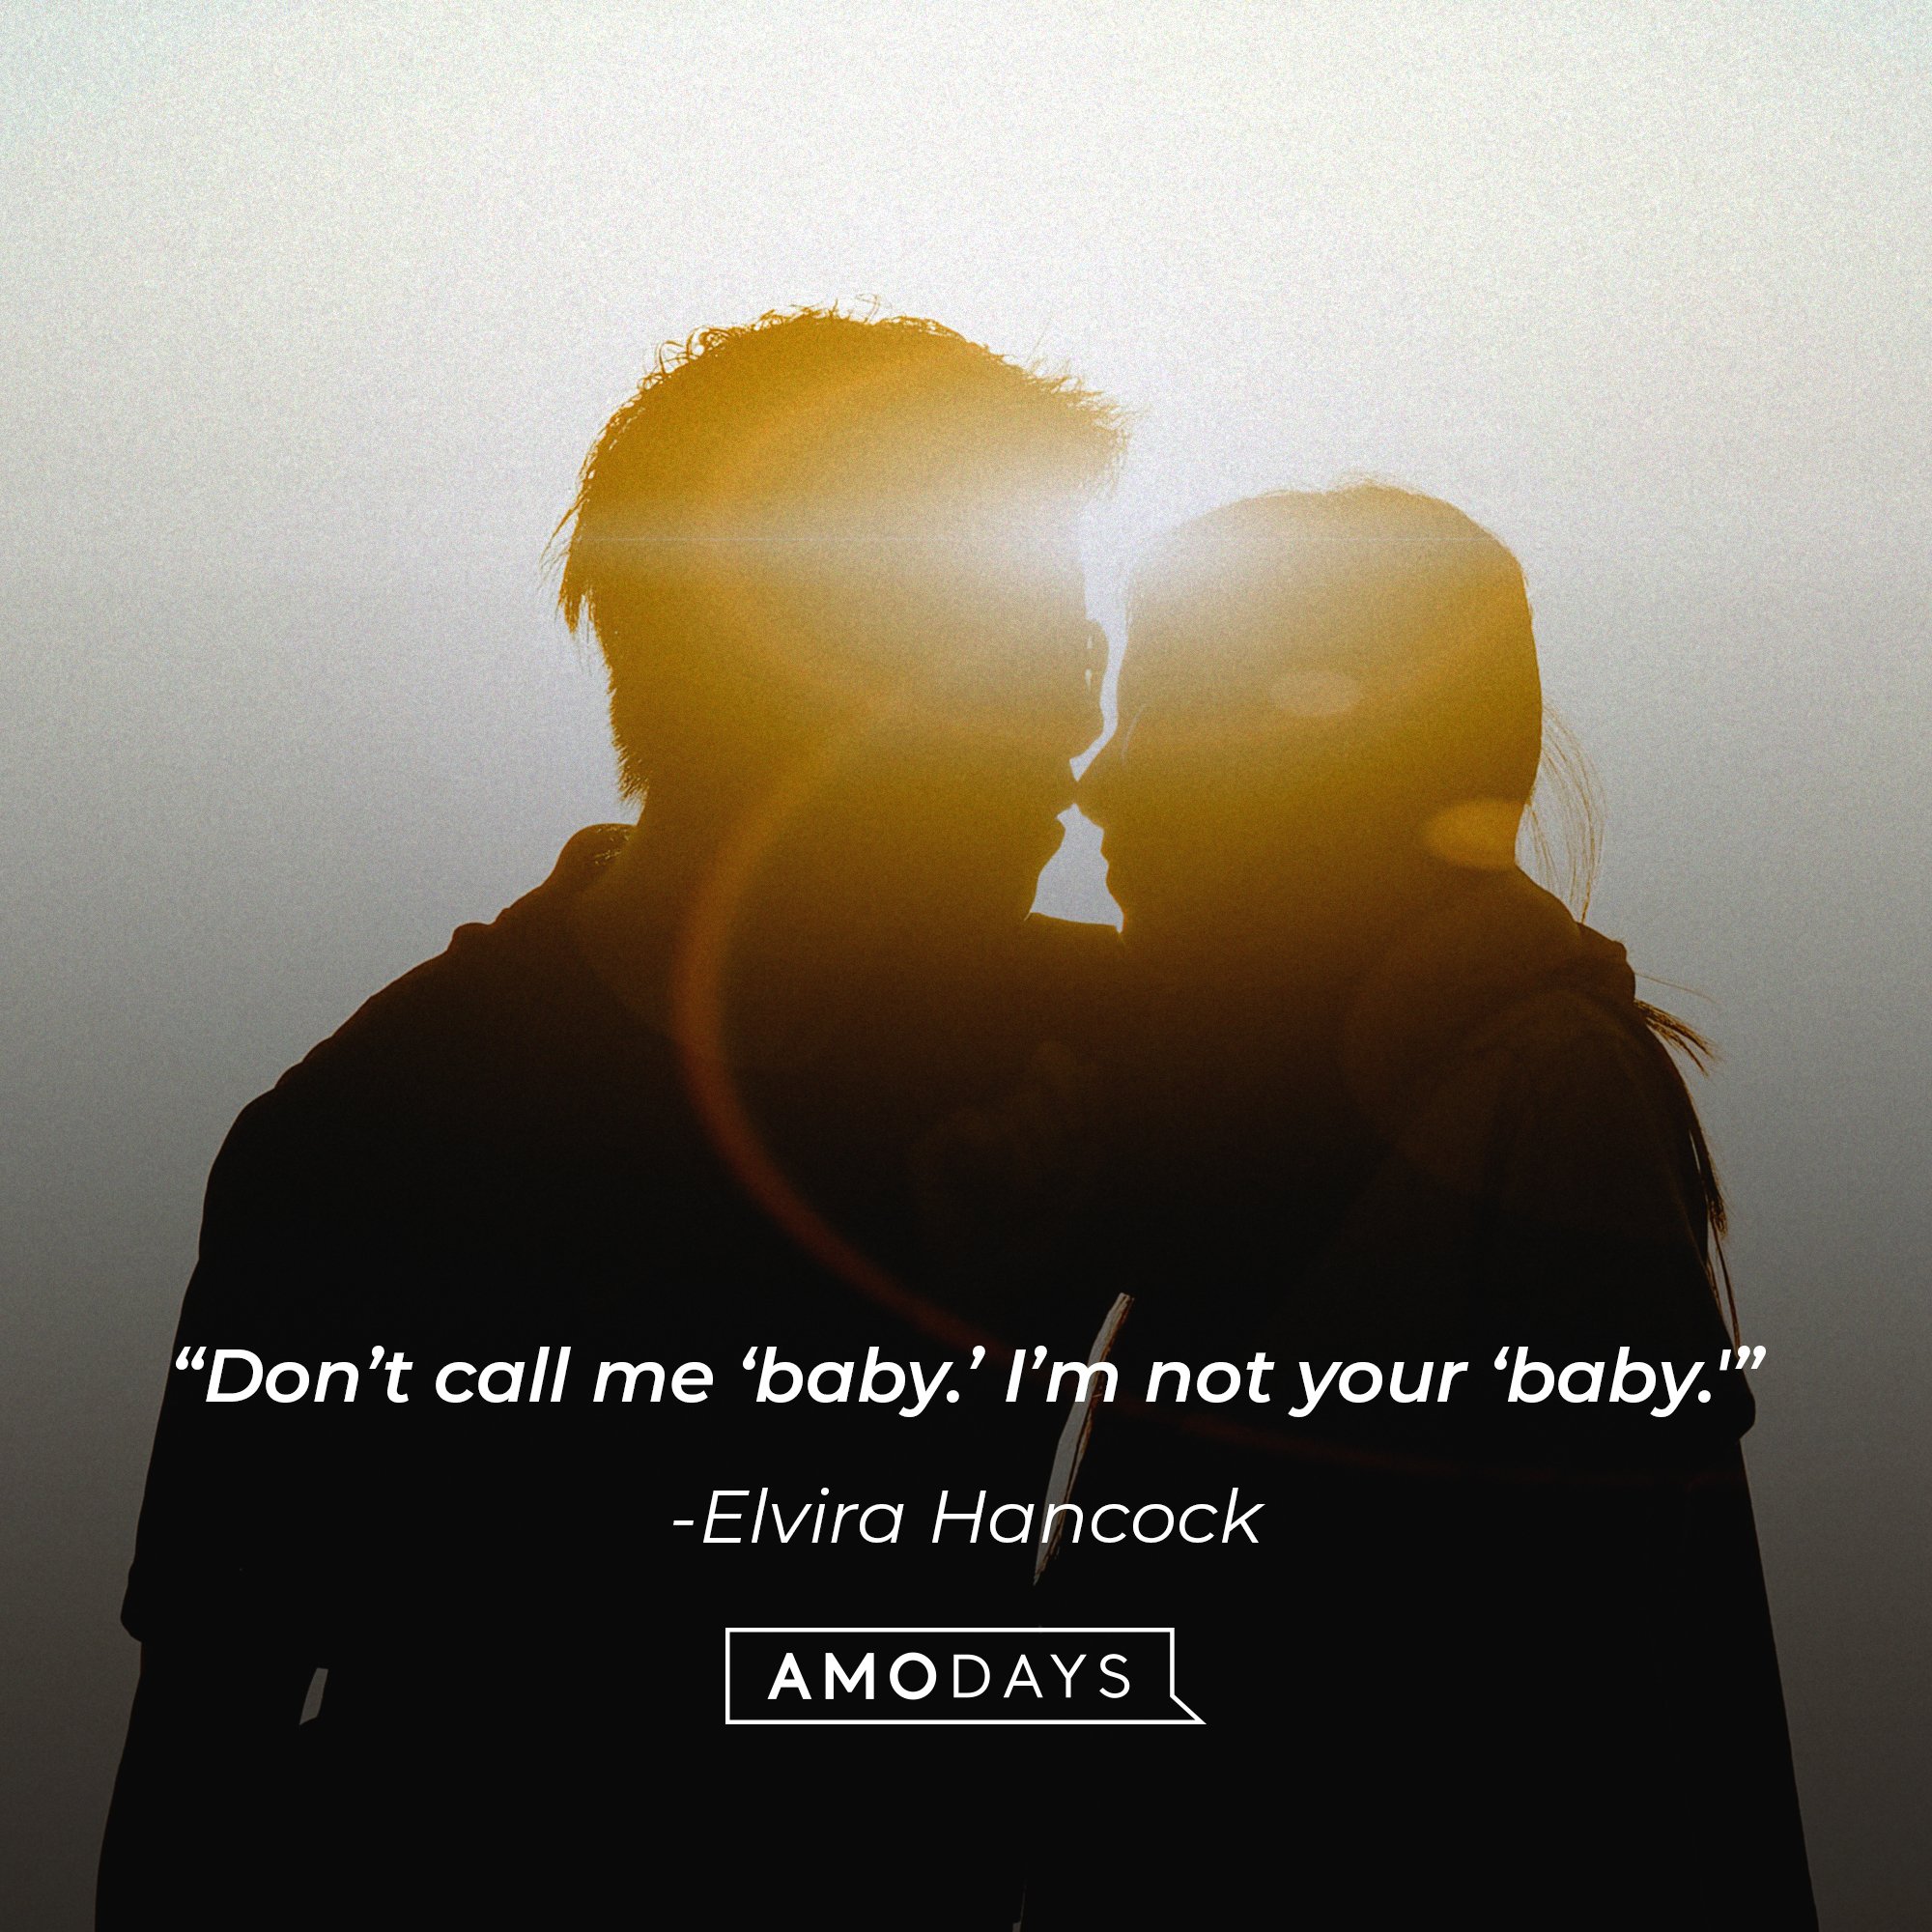 Elvira Hancock’s quote: "Don’t call me ‘baby.’ I’m not your ‘baby.'” | Image: AmoDays